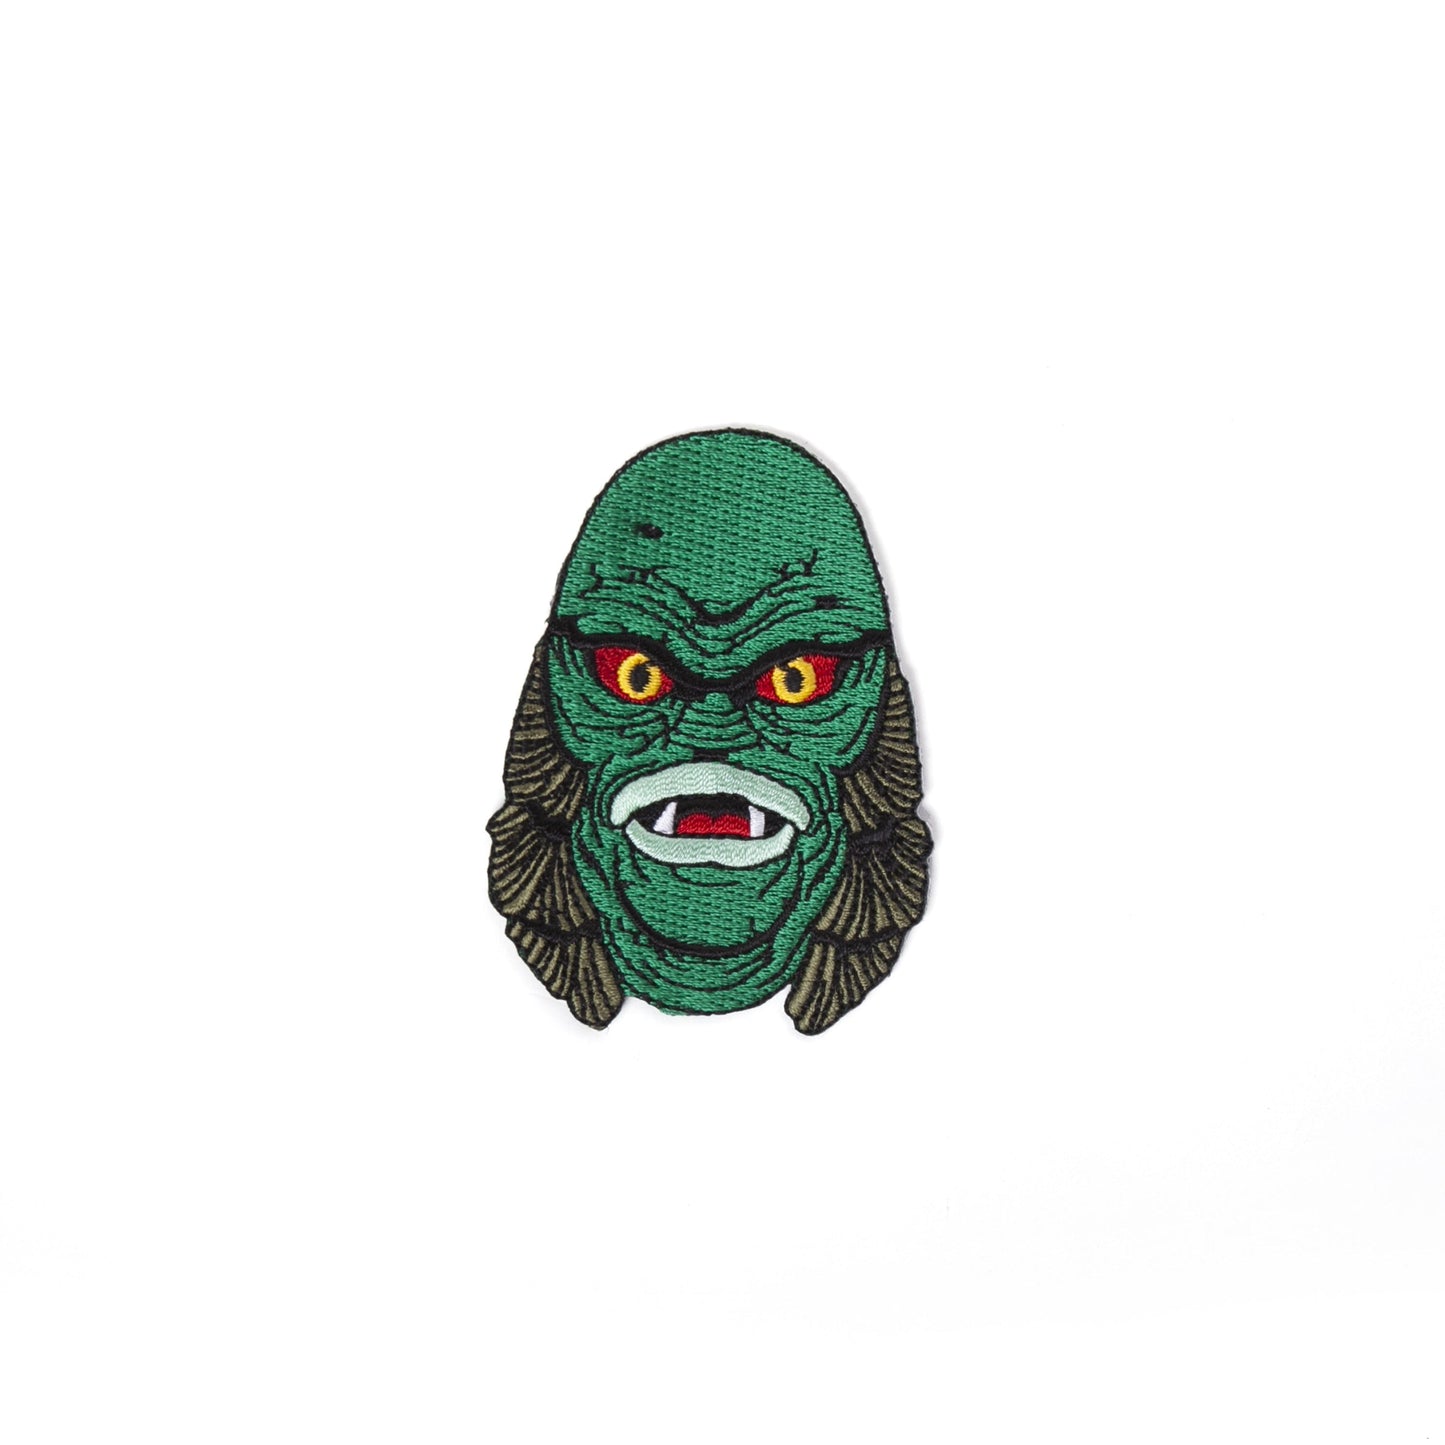 Creature From the Black Lagoon Patch